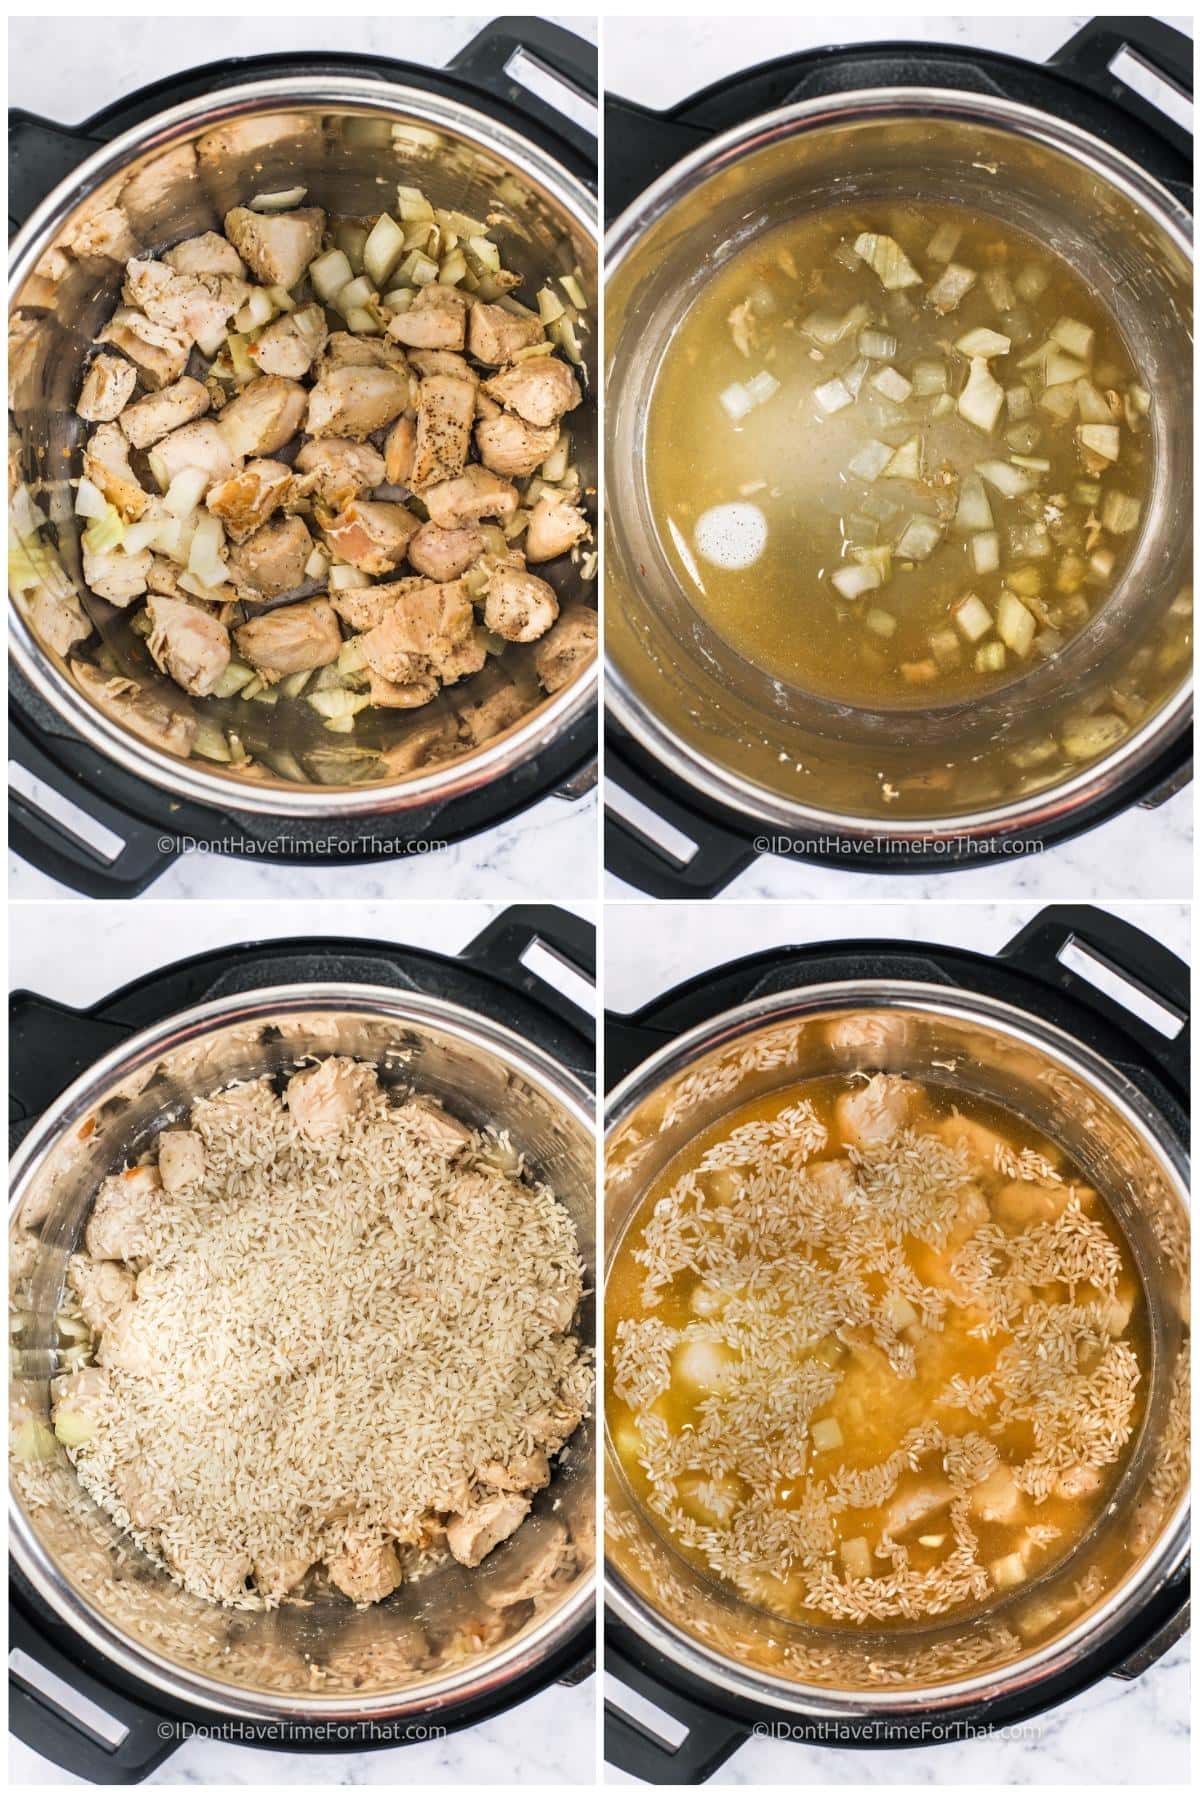 process of adding ingredients to pot to make Instant Pot Chicken Broccoli and Rice